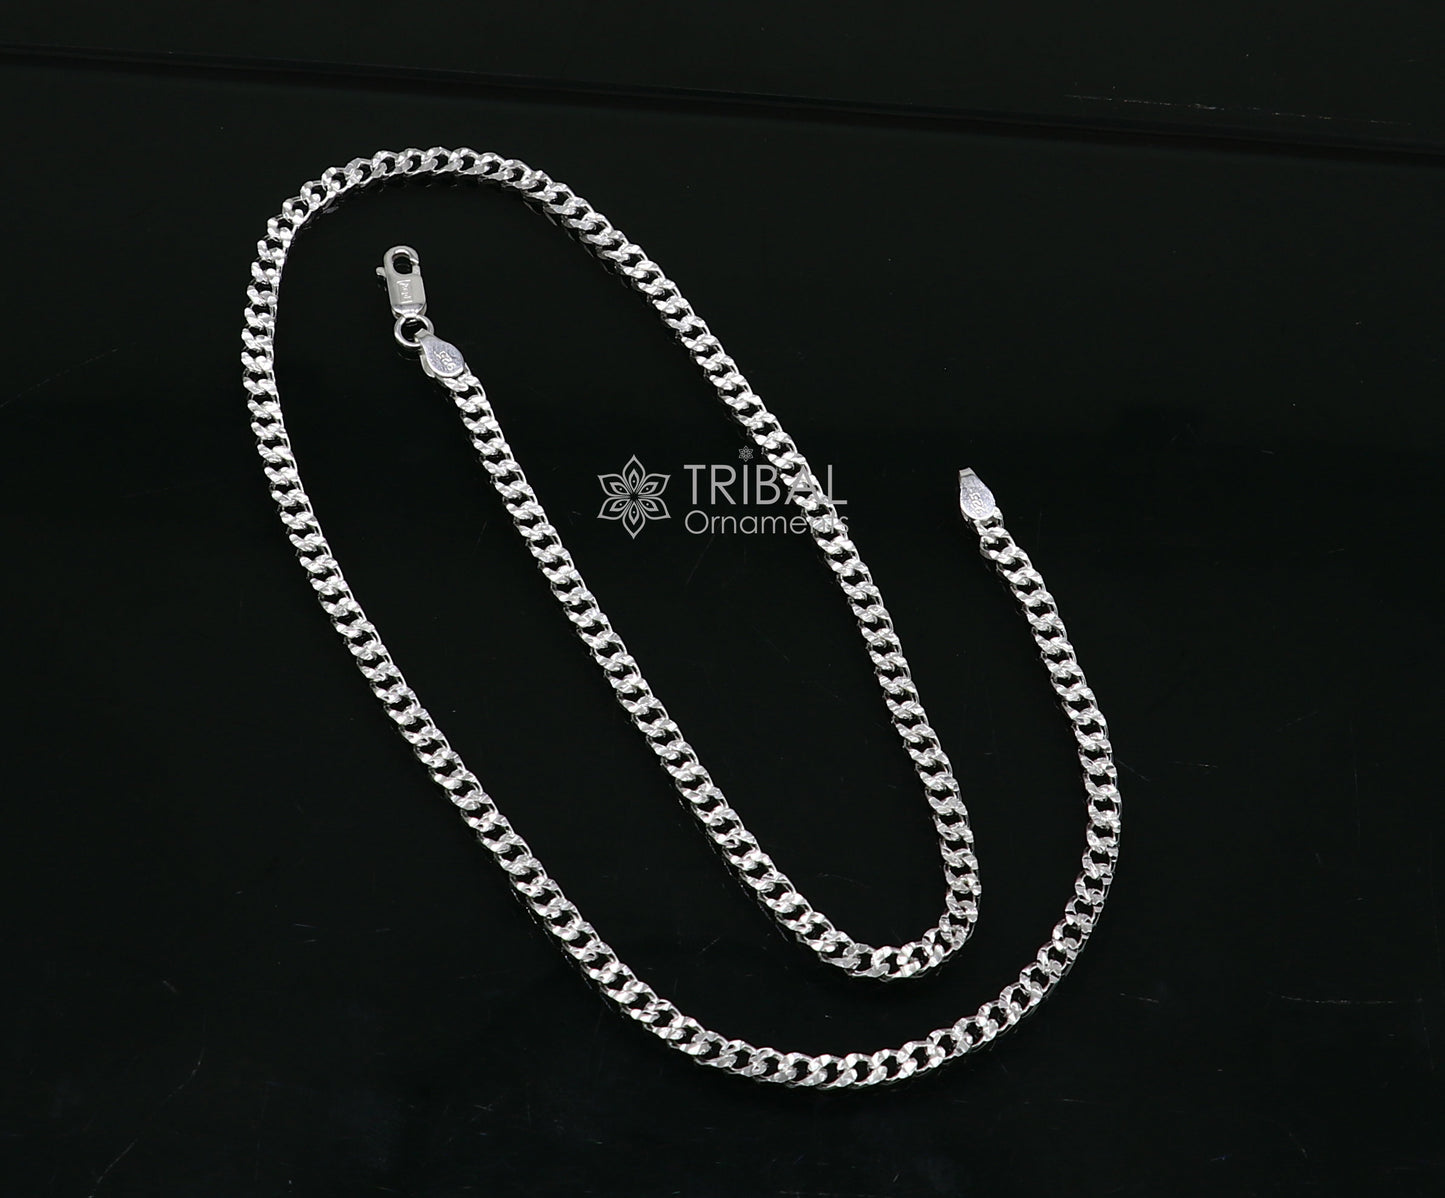 3mm 20" solid 925 sterling silver handmade modern trendy design wheat chain necklace giving it a distinctive and stylish look ch250 - TRIBAL ORNAMENTS